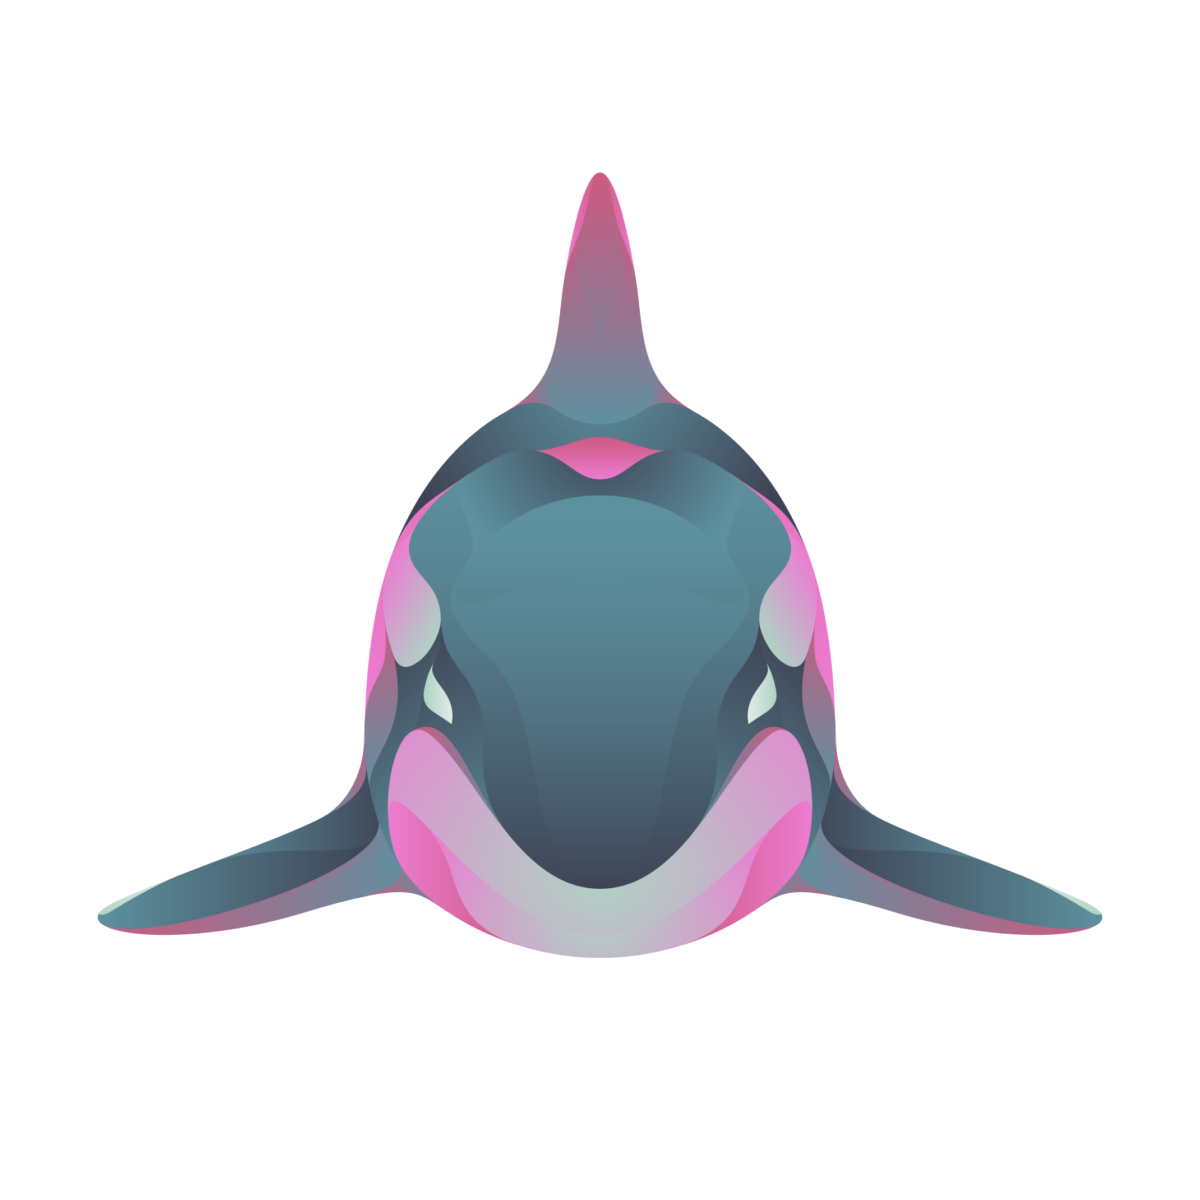 15. Orcinus Orca - DISAPPOINTED WILDLIFE